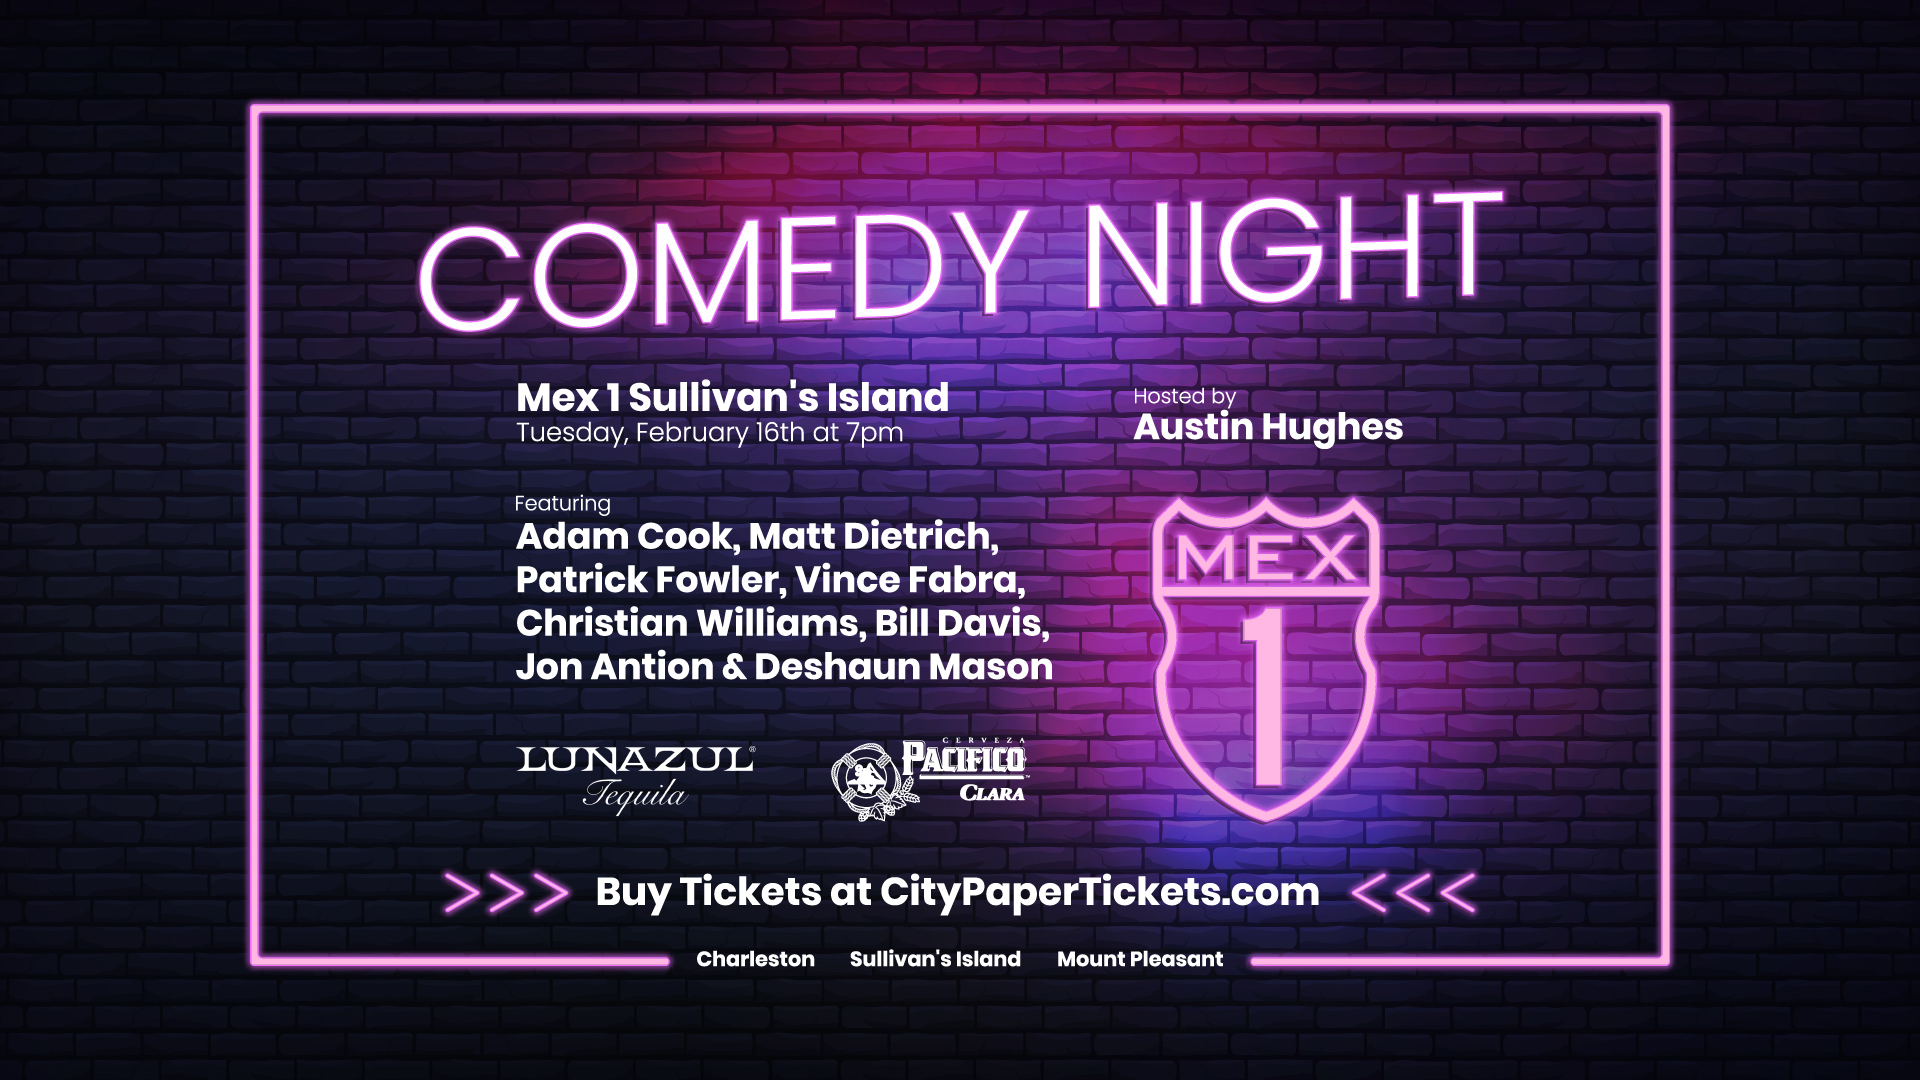 Comedy Night at Mex 1 Sullivan's Island Tuesday, February 16th at 7pm